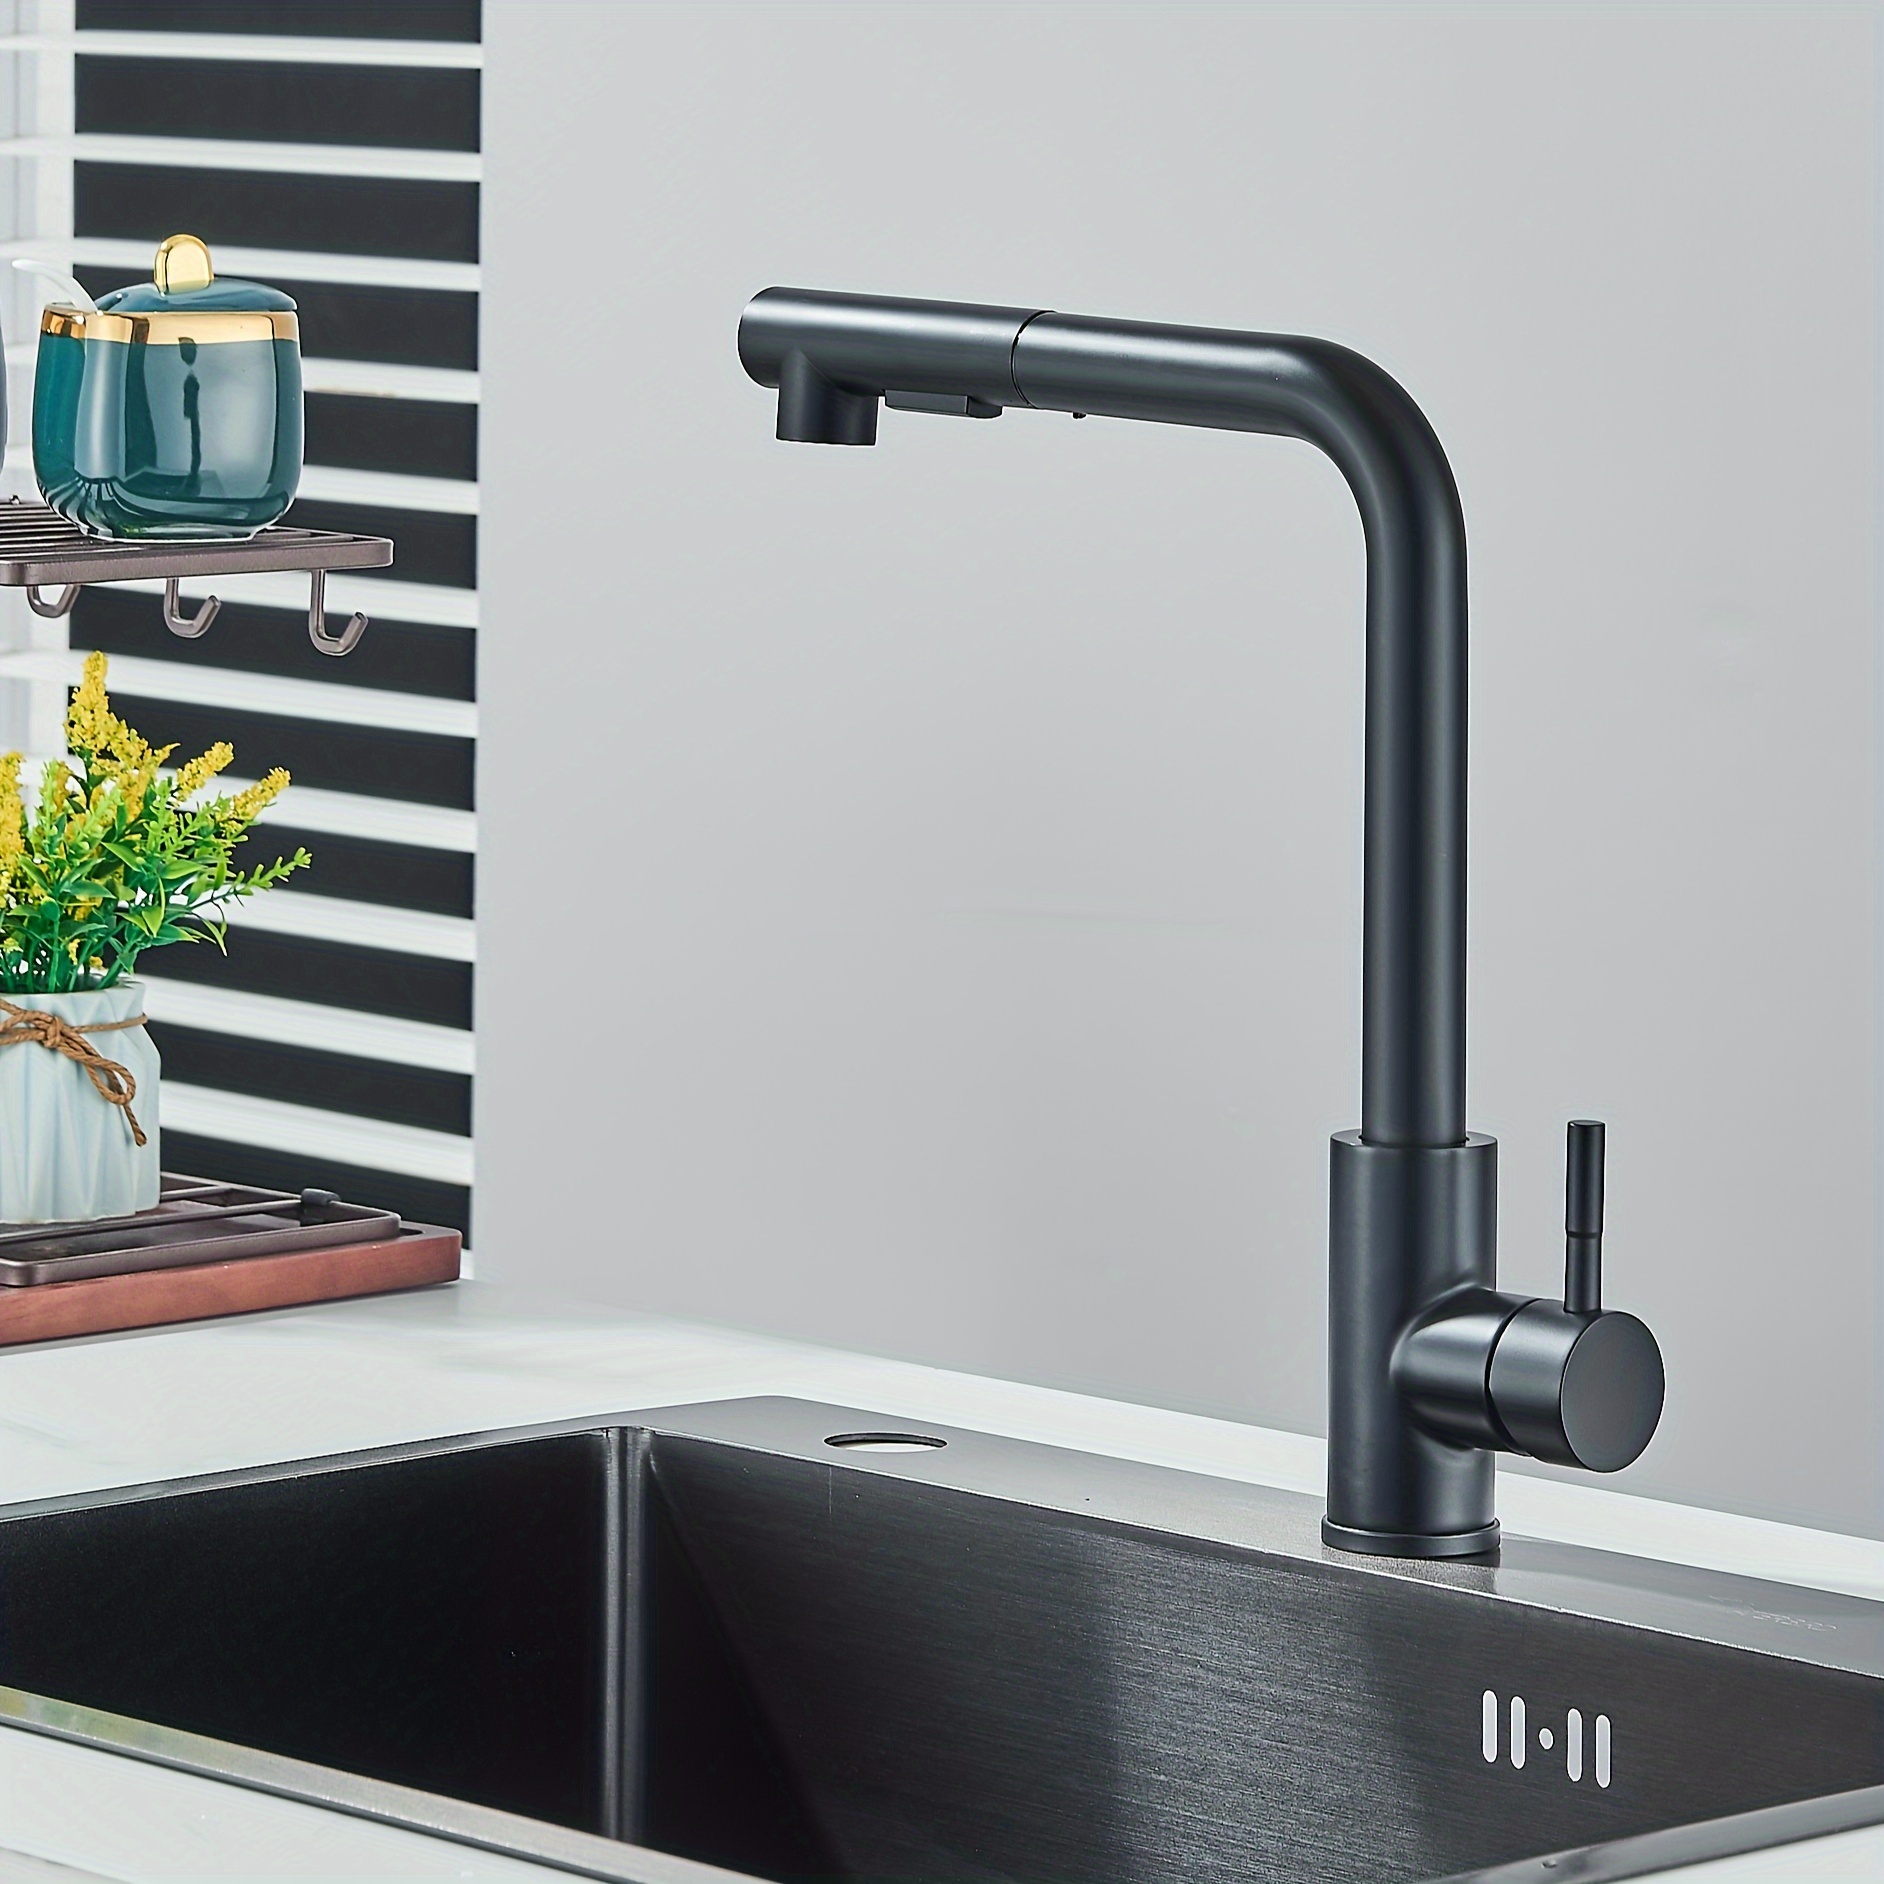 Black Utility Sink 304 Stainless Steel Kitchen Sink Countertop Sink RV Hand  Washing Sink Commercial Bar Sink Laundry Room Sink, with Pull-Out Faucet